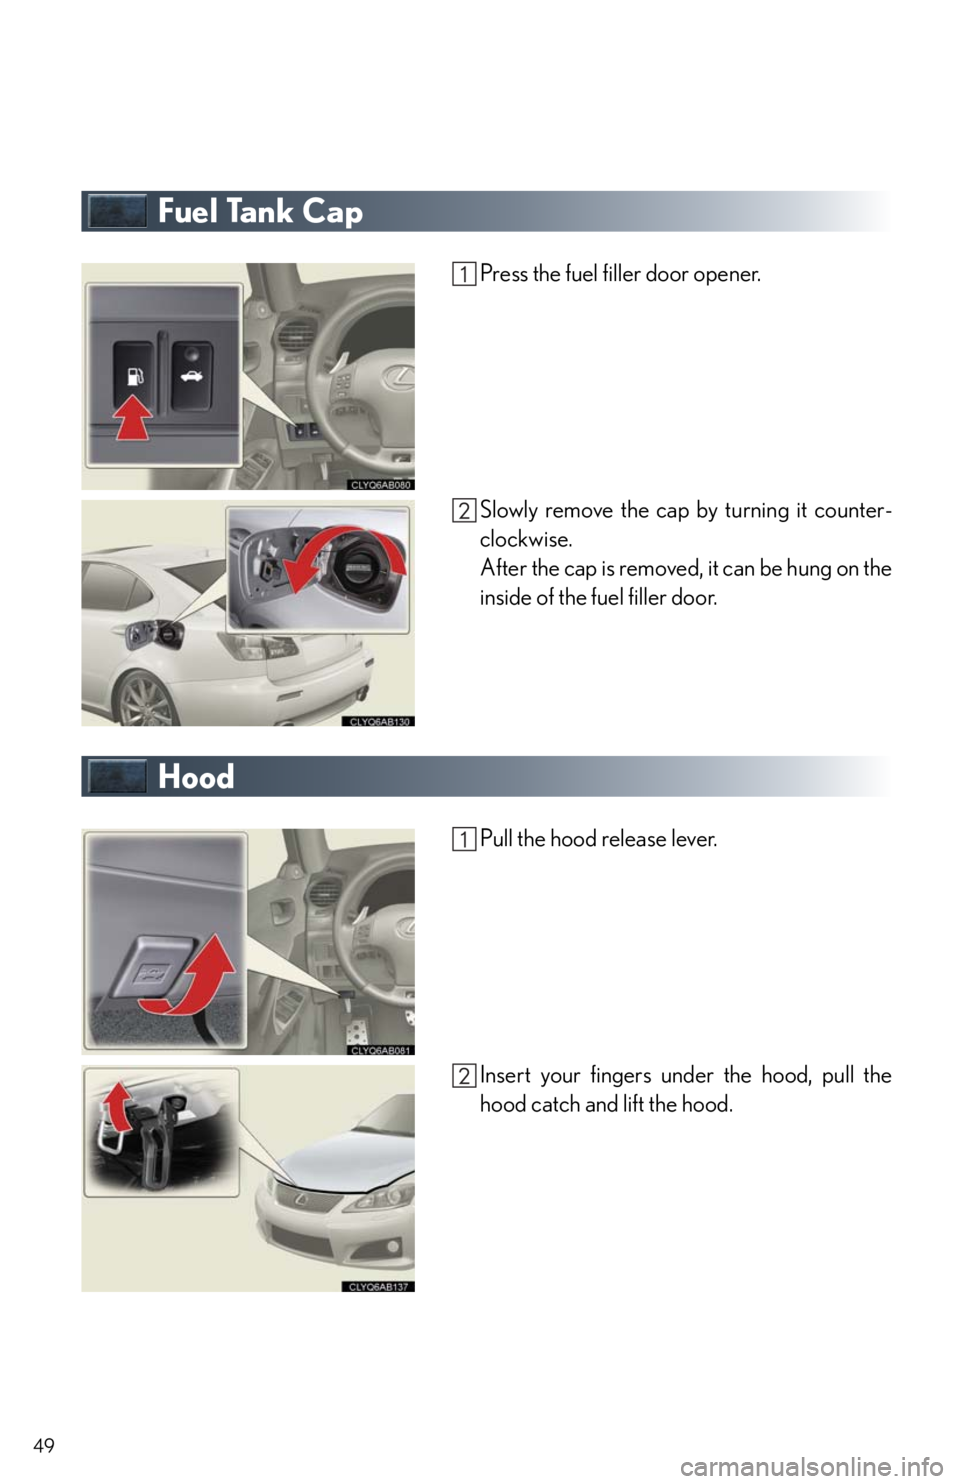 Lexus IS F 2011  Instrument Cluster / LEXUS 2011 IS F  QUICK GUIDE (OM53A11U) Service Manual 49
Fuel Tank Cap
Press the fuel filler door opener.
Slowly remove the cap by turning it counter-
clockwise.
After the cap is removed, it can be hung on the
inside of the fuel filler door.
Hood
Pull th